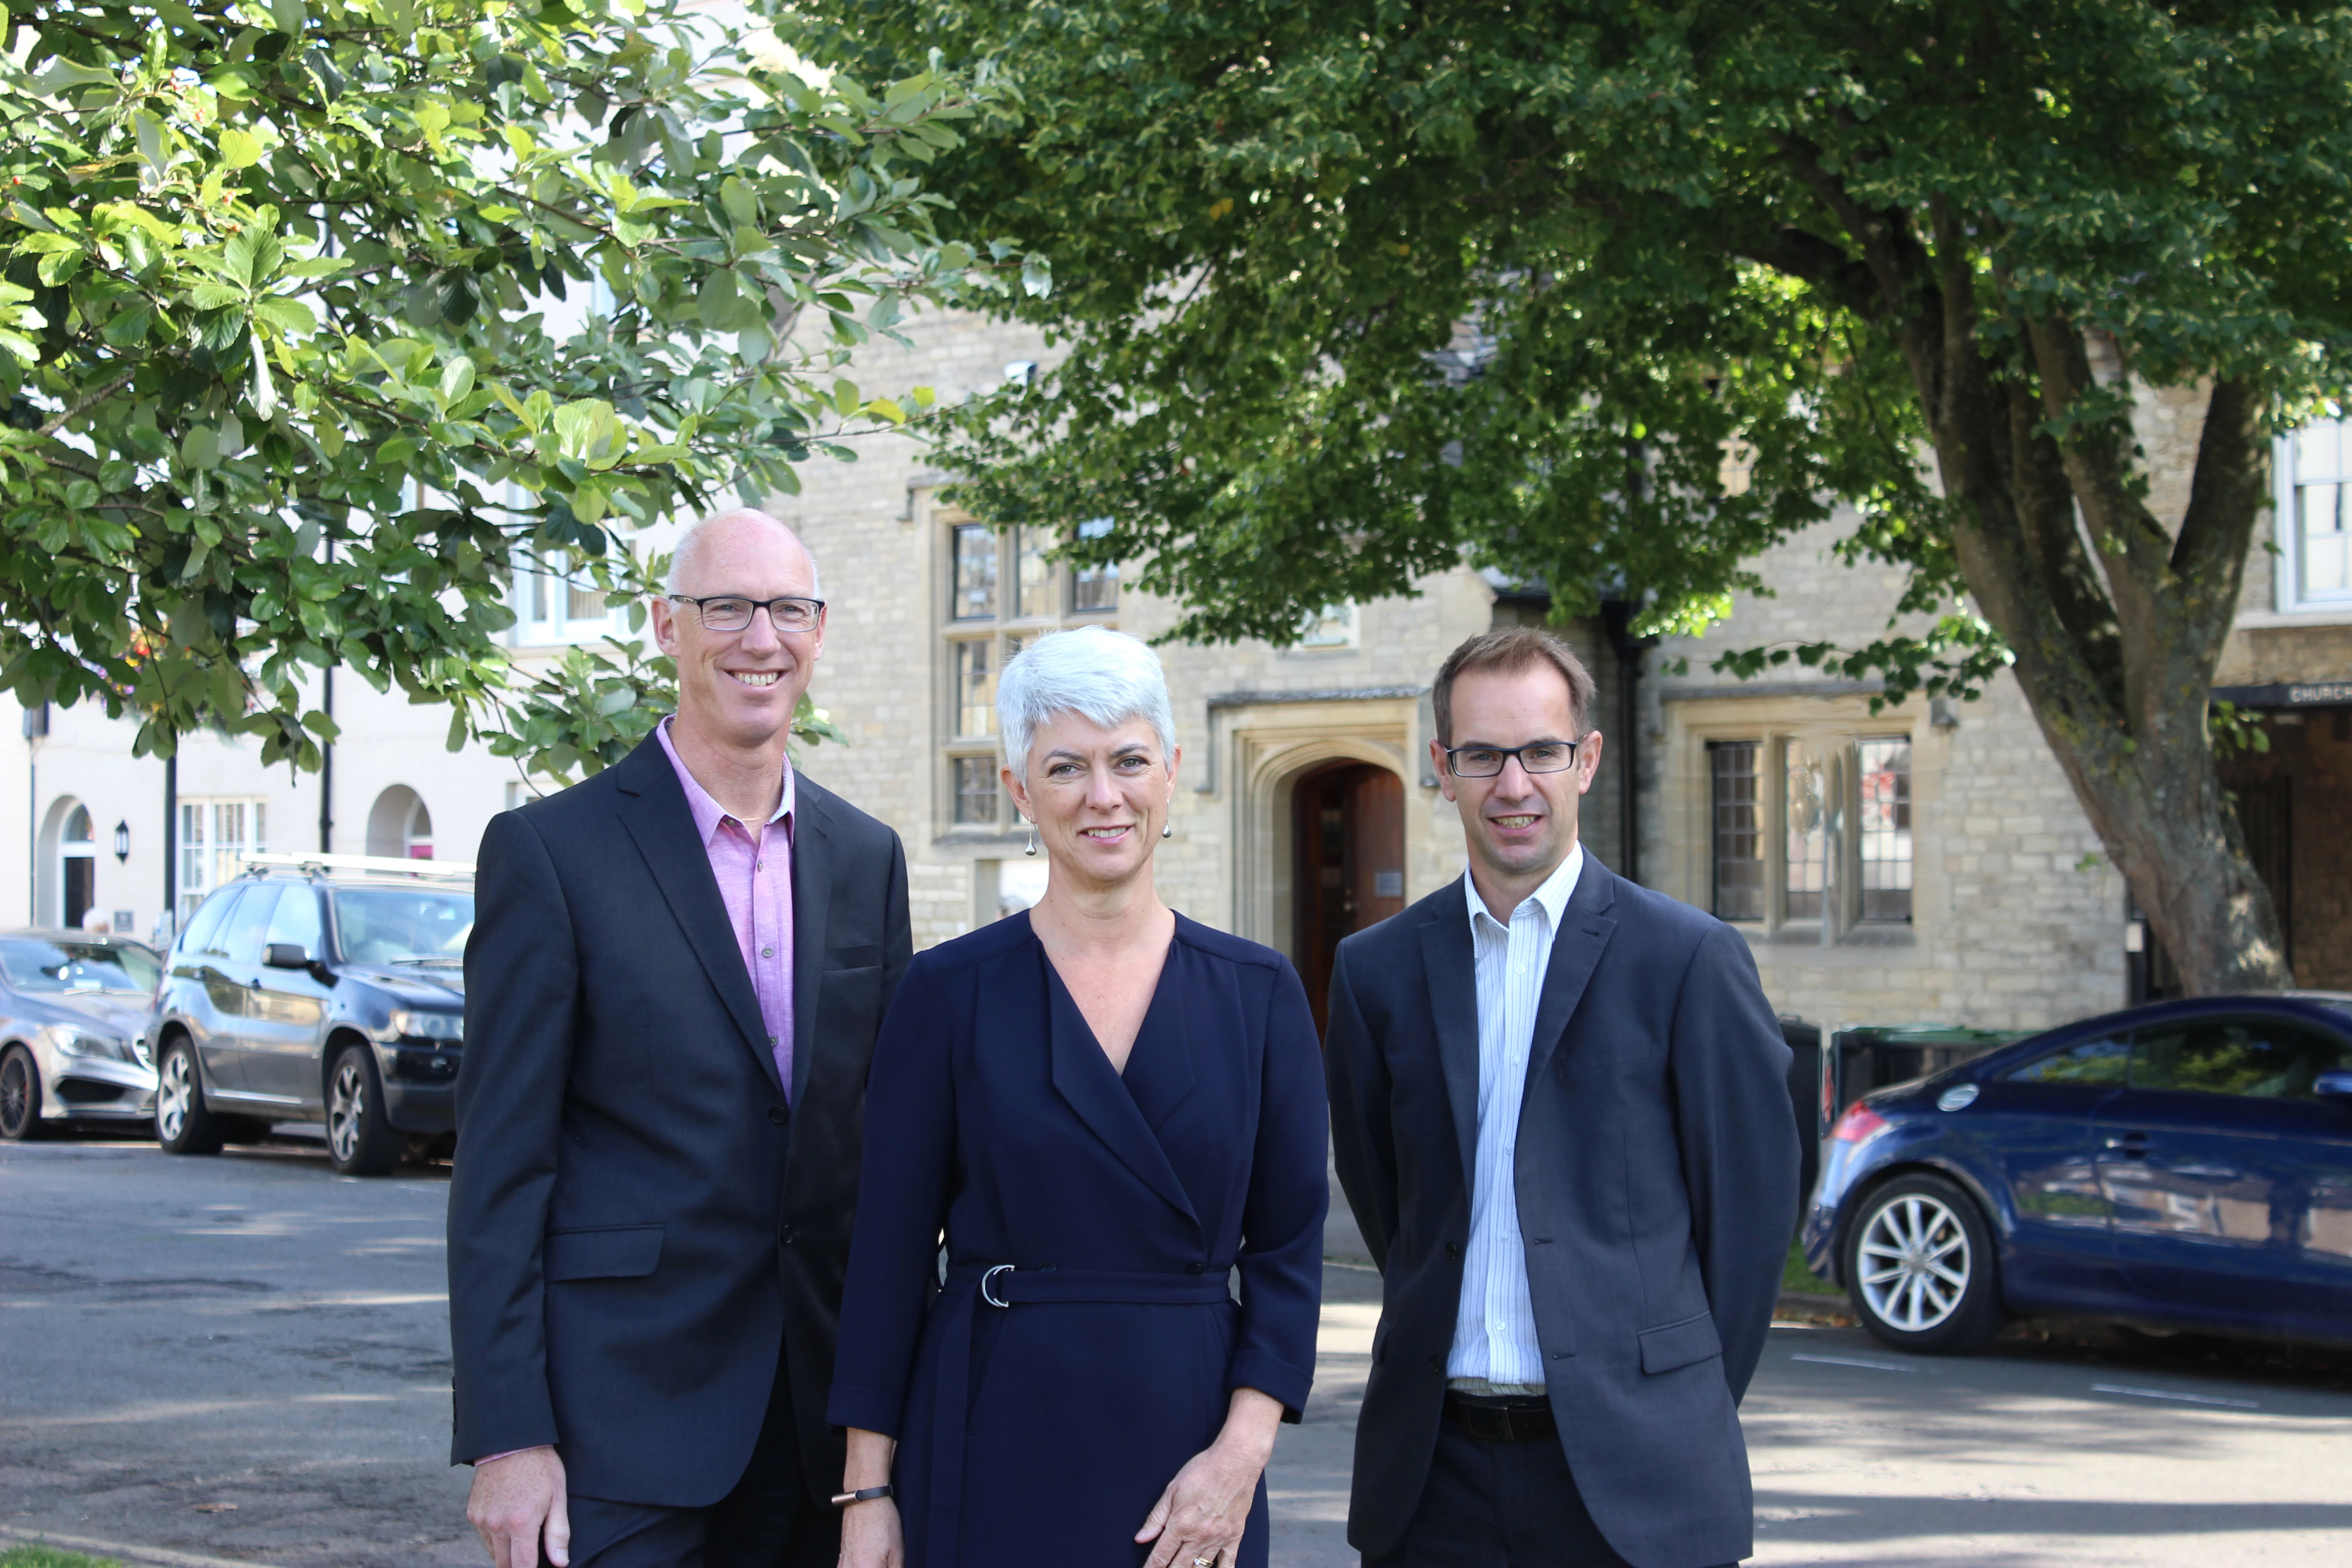 Edgars Limited founding directors, left to right, David Norris and Jayne Norris, with recently promoted, Jon Westerman, outside their new office in Witney